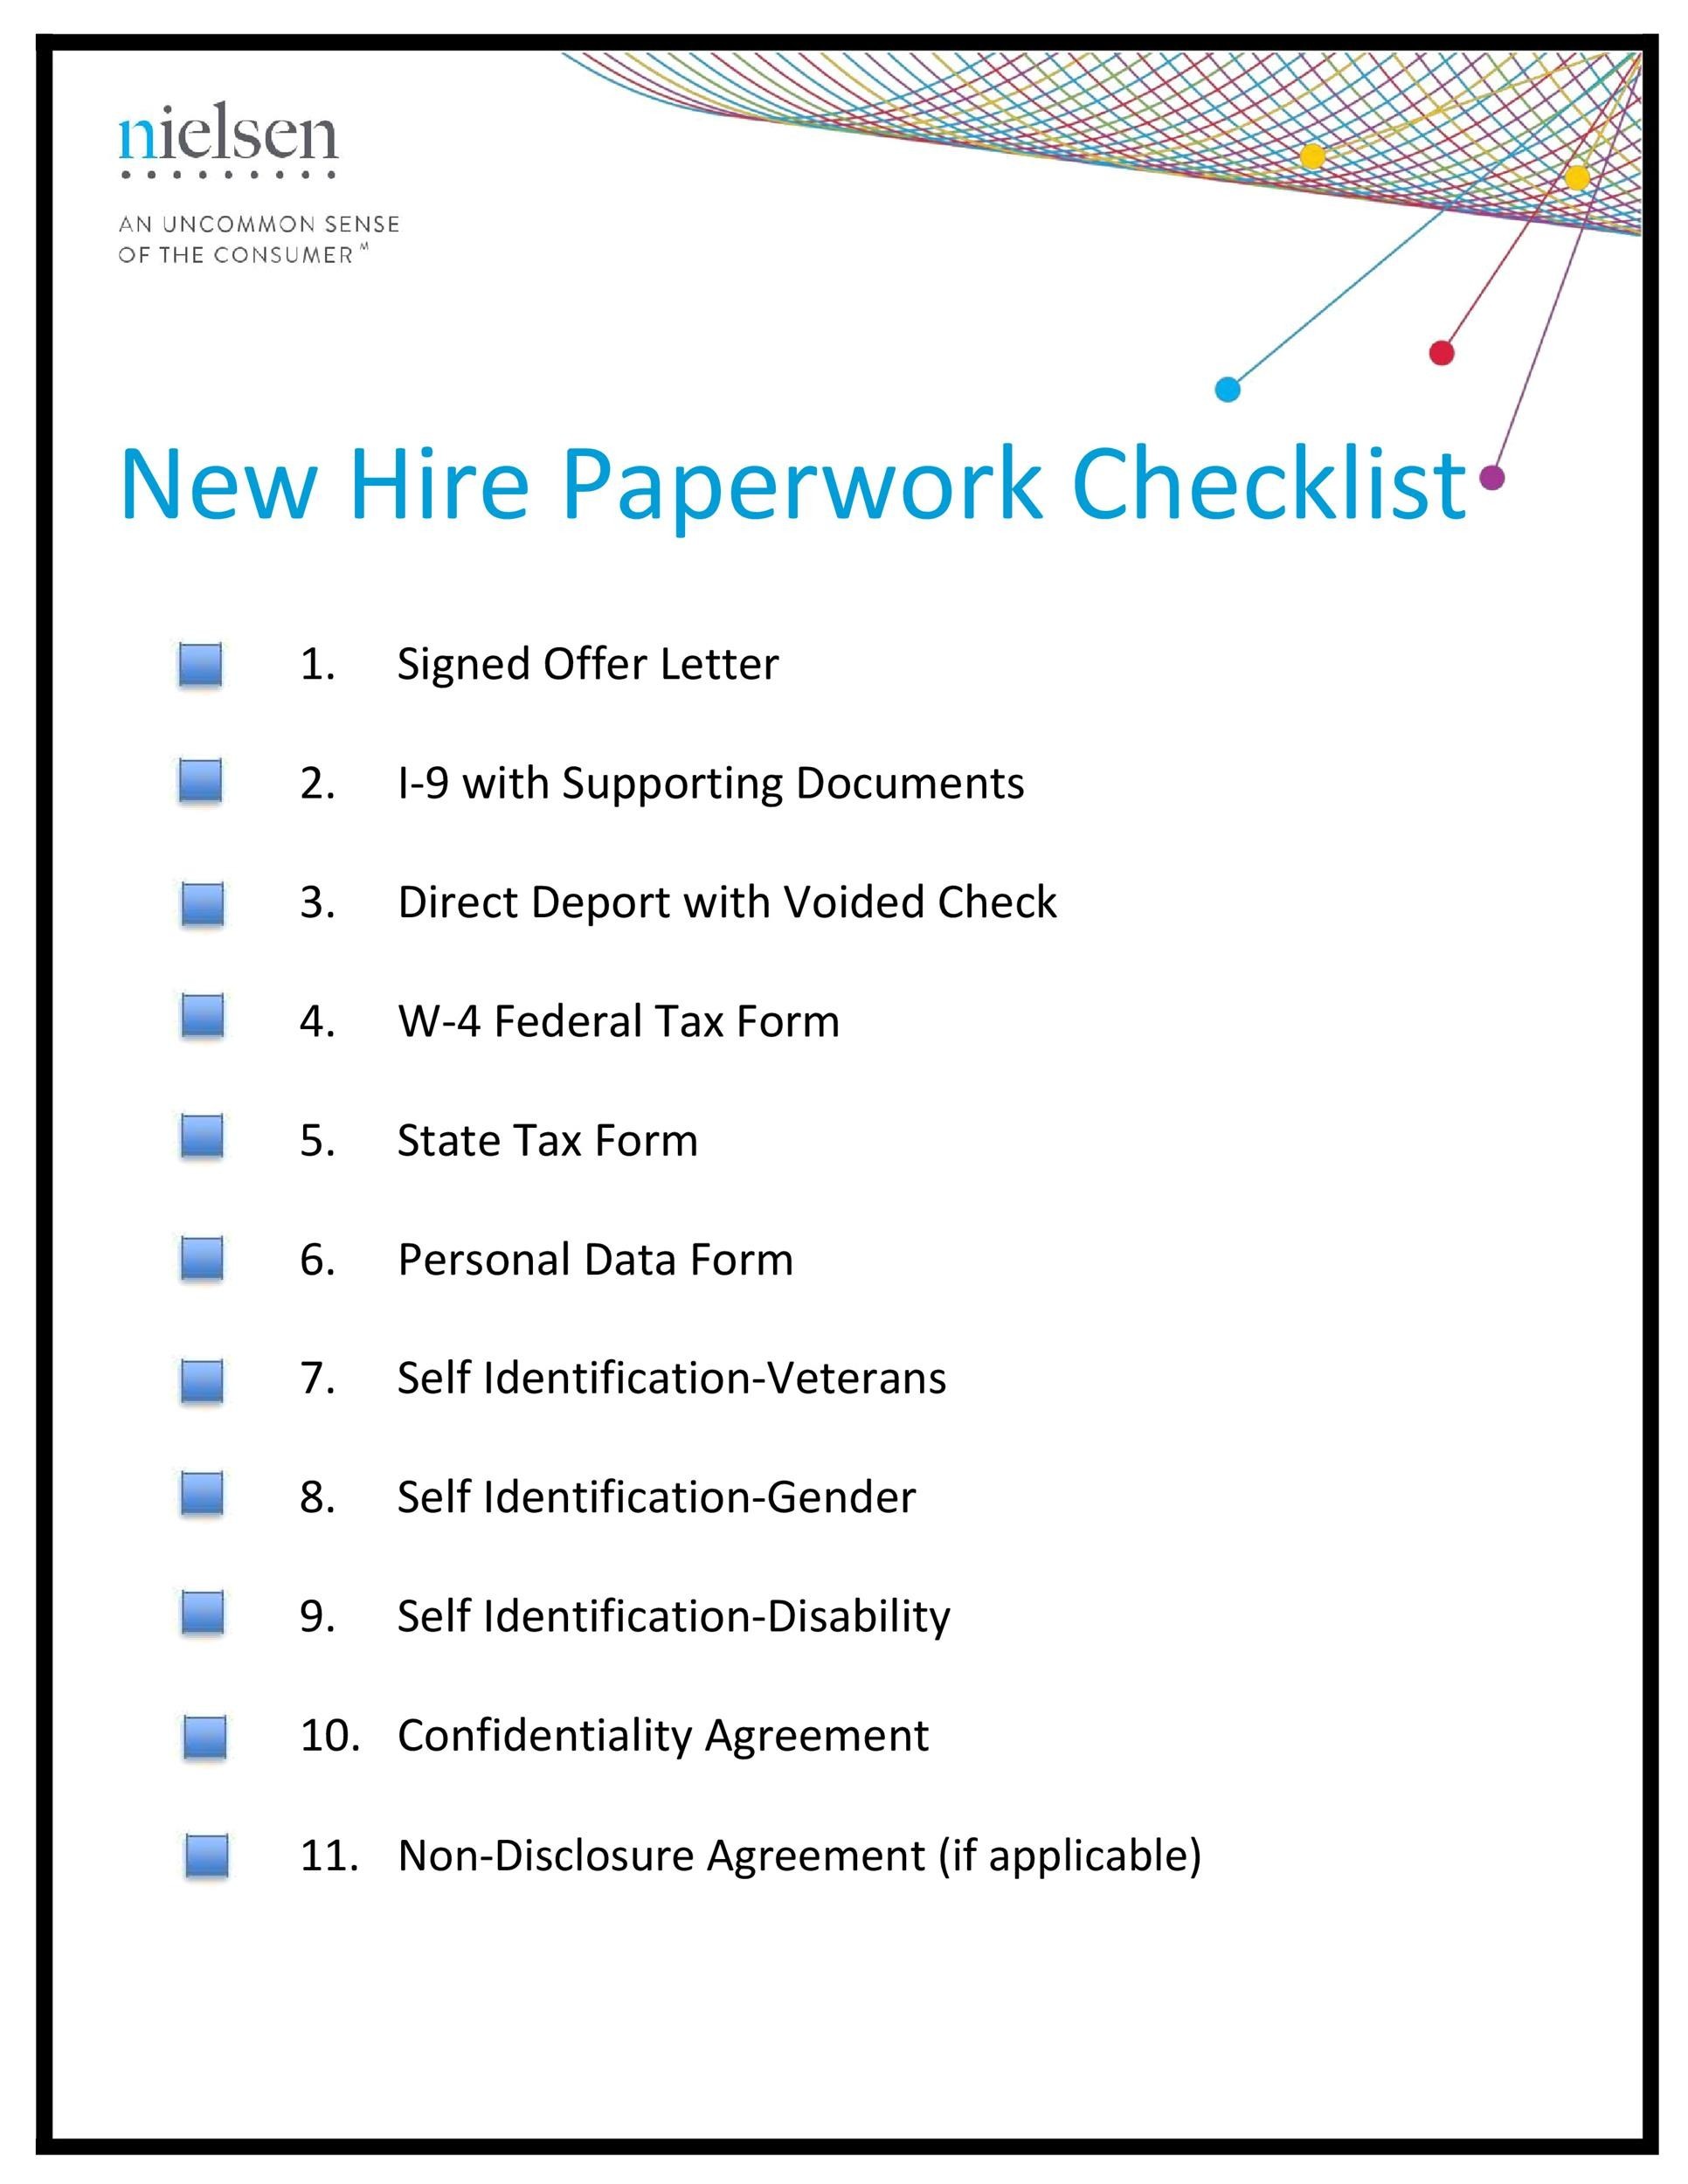 50 Useful New Hire Checklist Templates Forms ᐅ TemplateLab